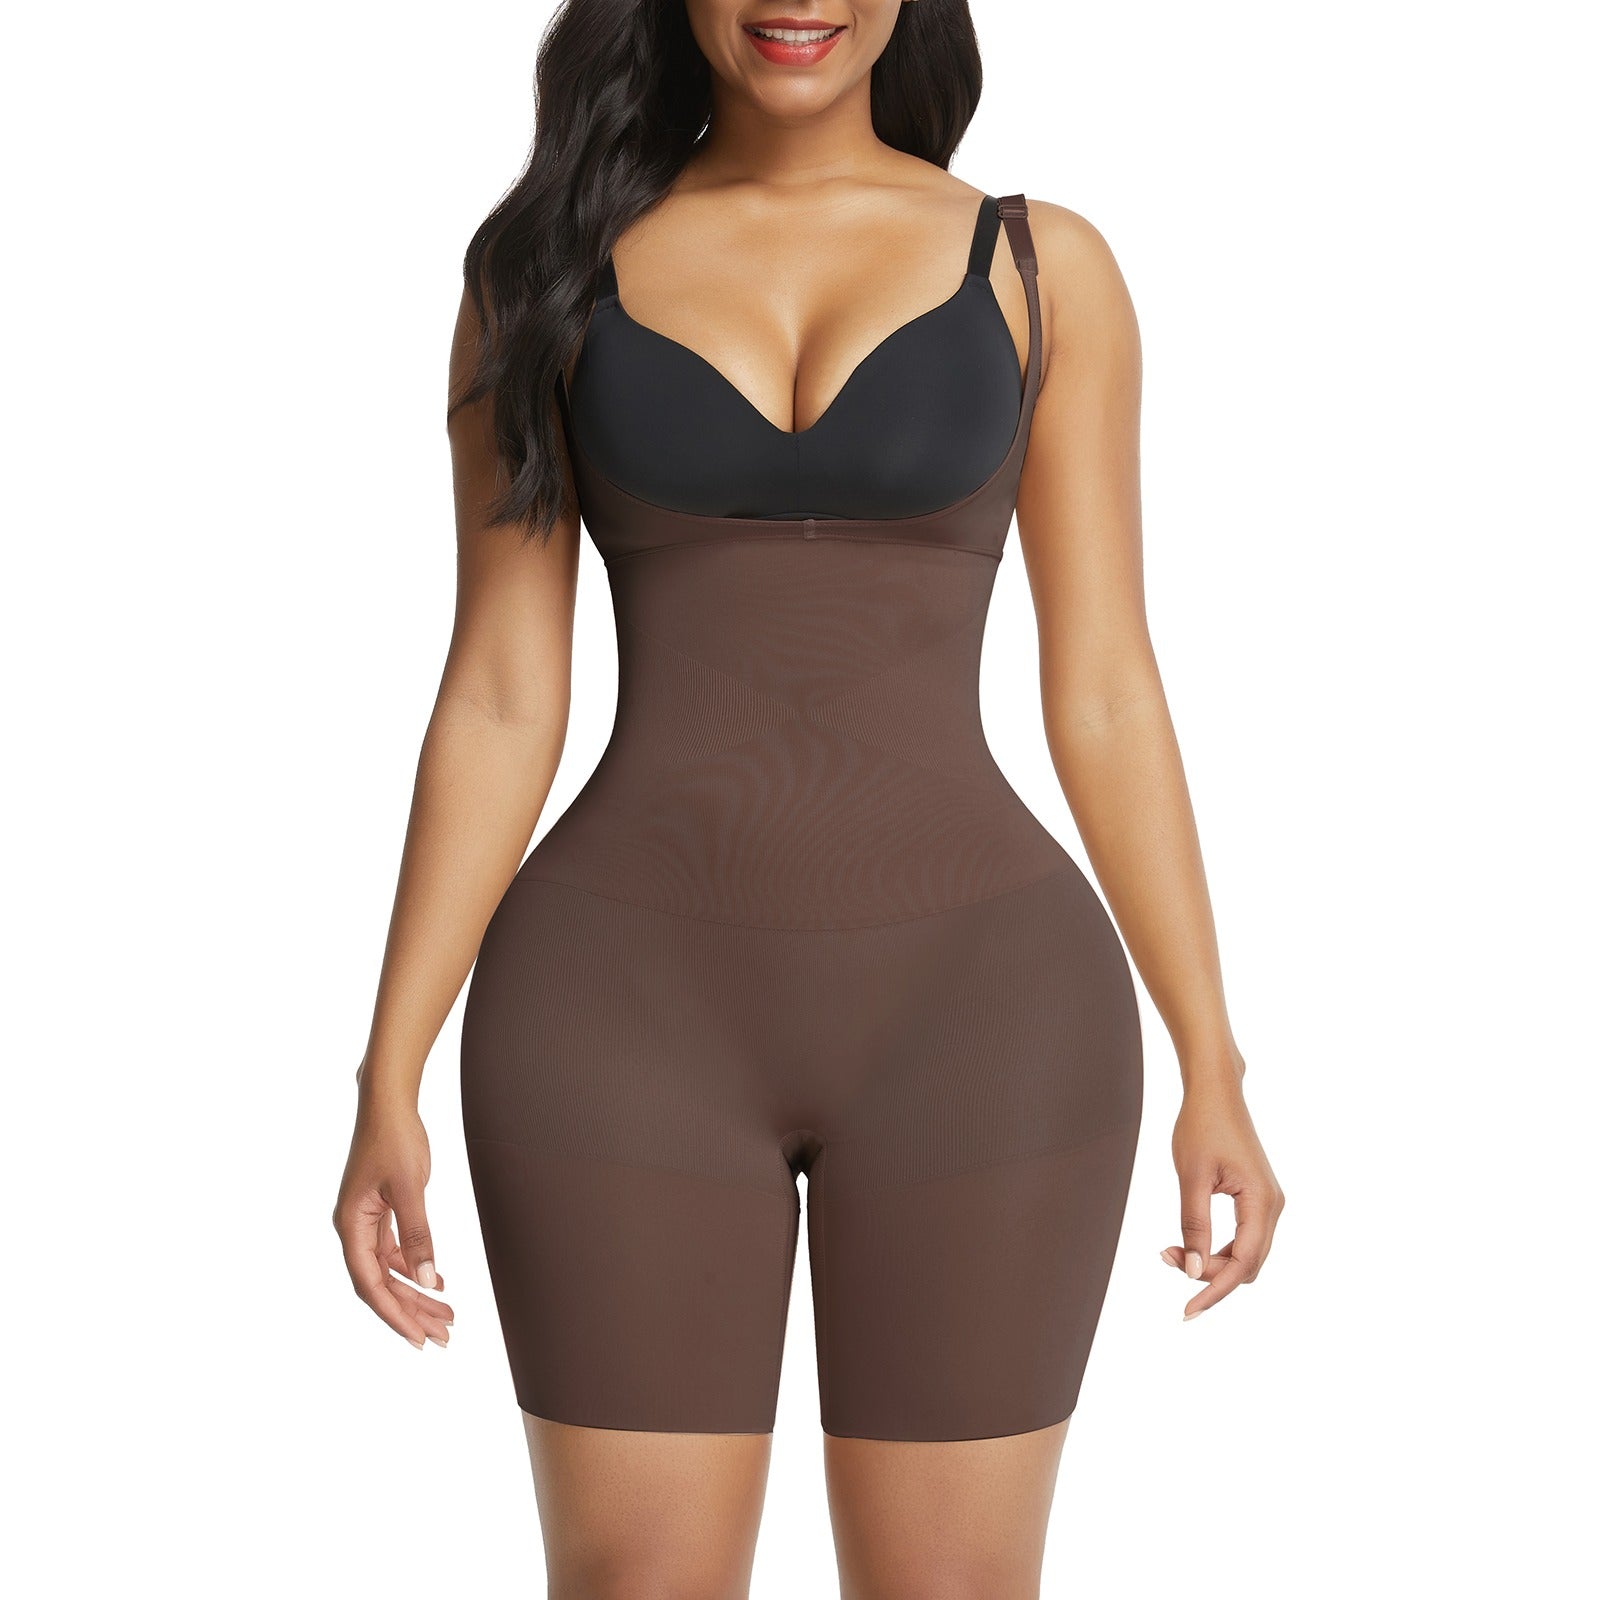 JUST FOR HER: Mother's Day Specials Up to 72% Off - Shapewear USA